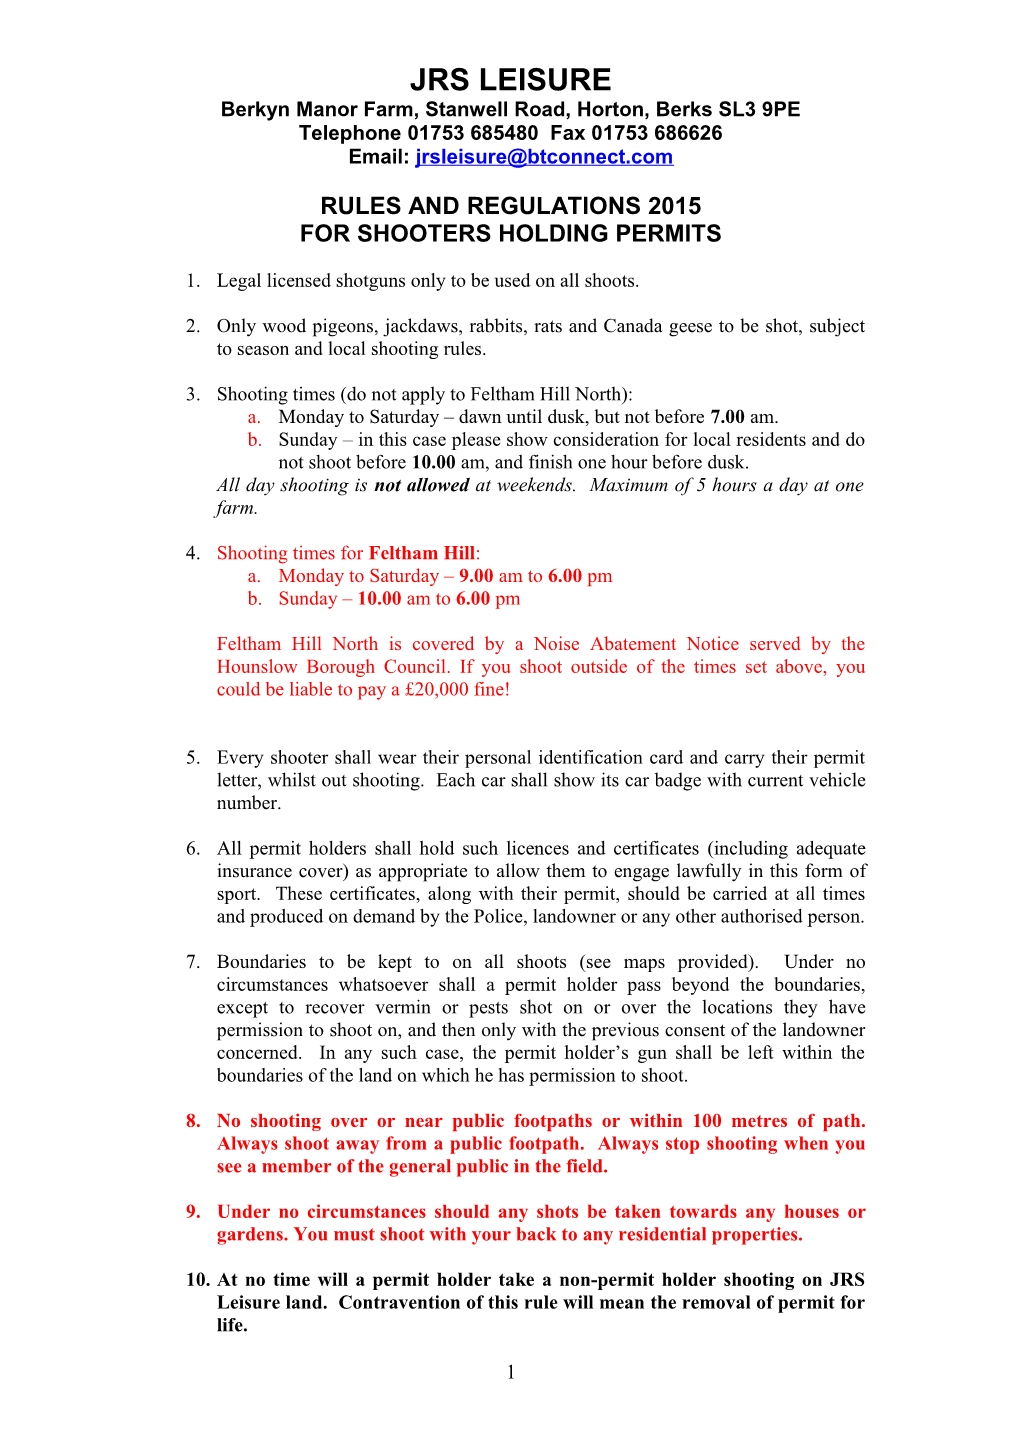 Rules and Regulations 2008